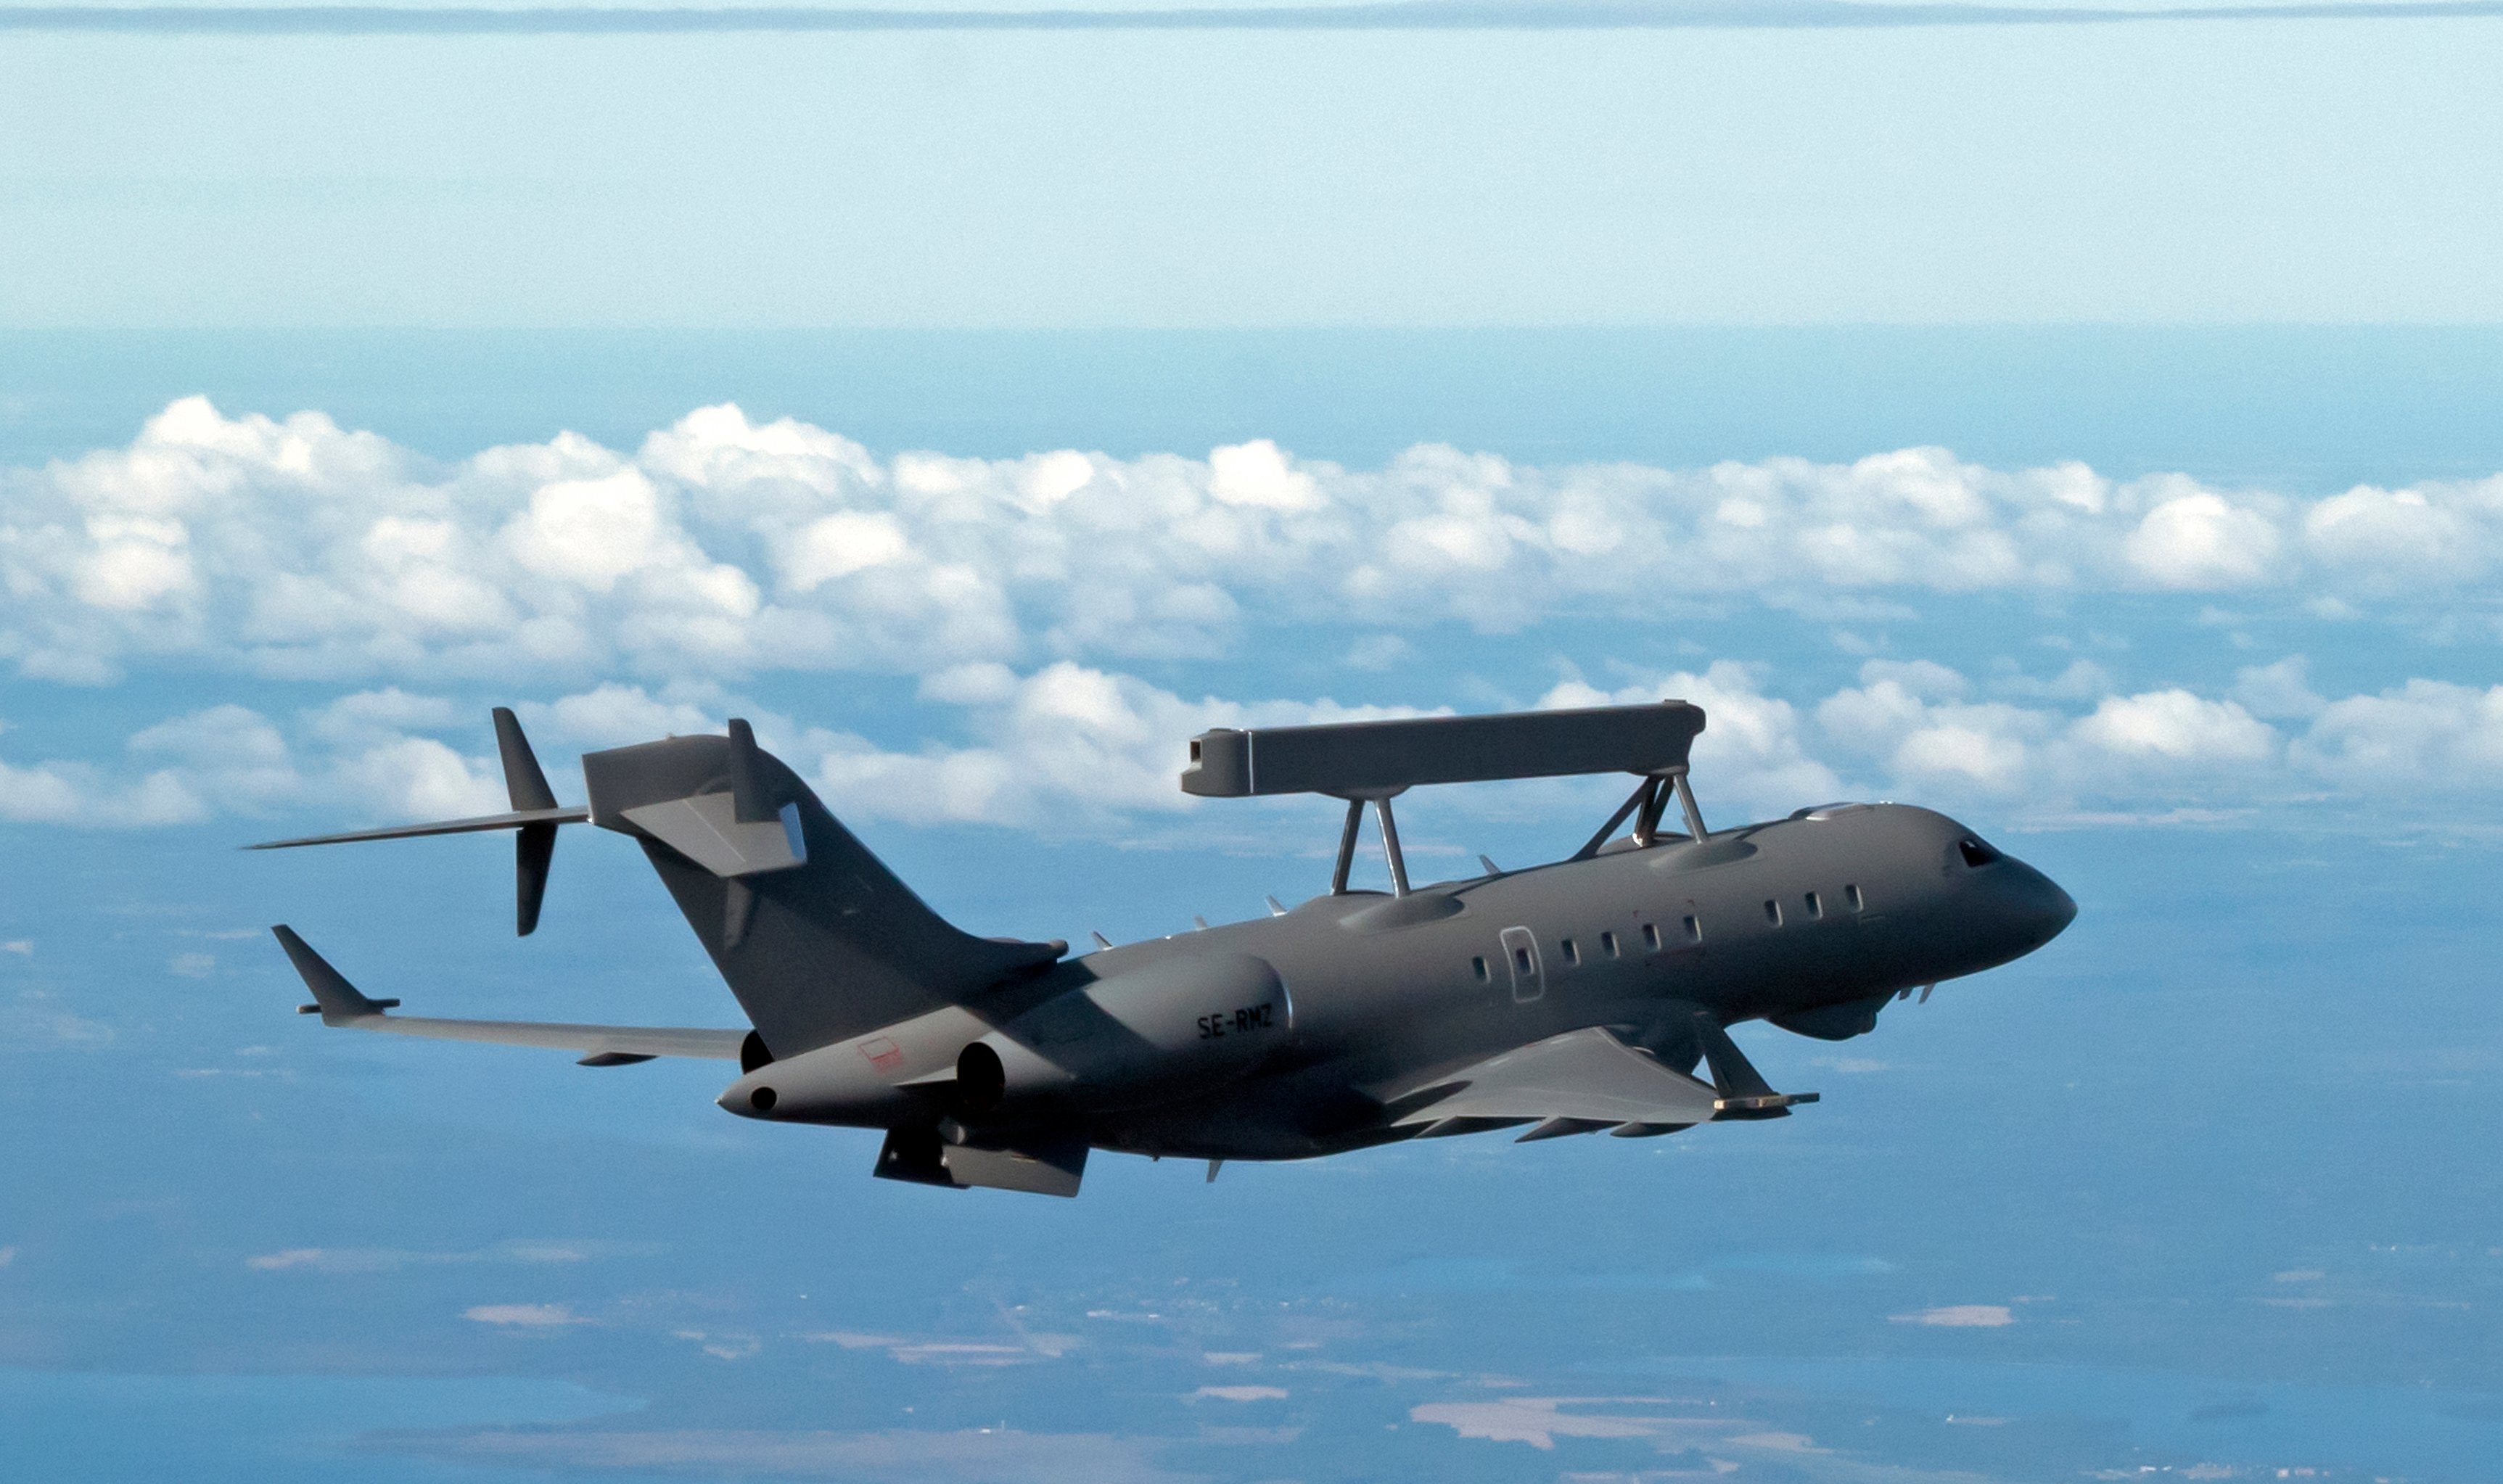 Saab's Fourth GlobalEye Conducted Successful First Flight